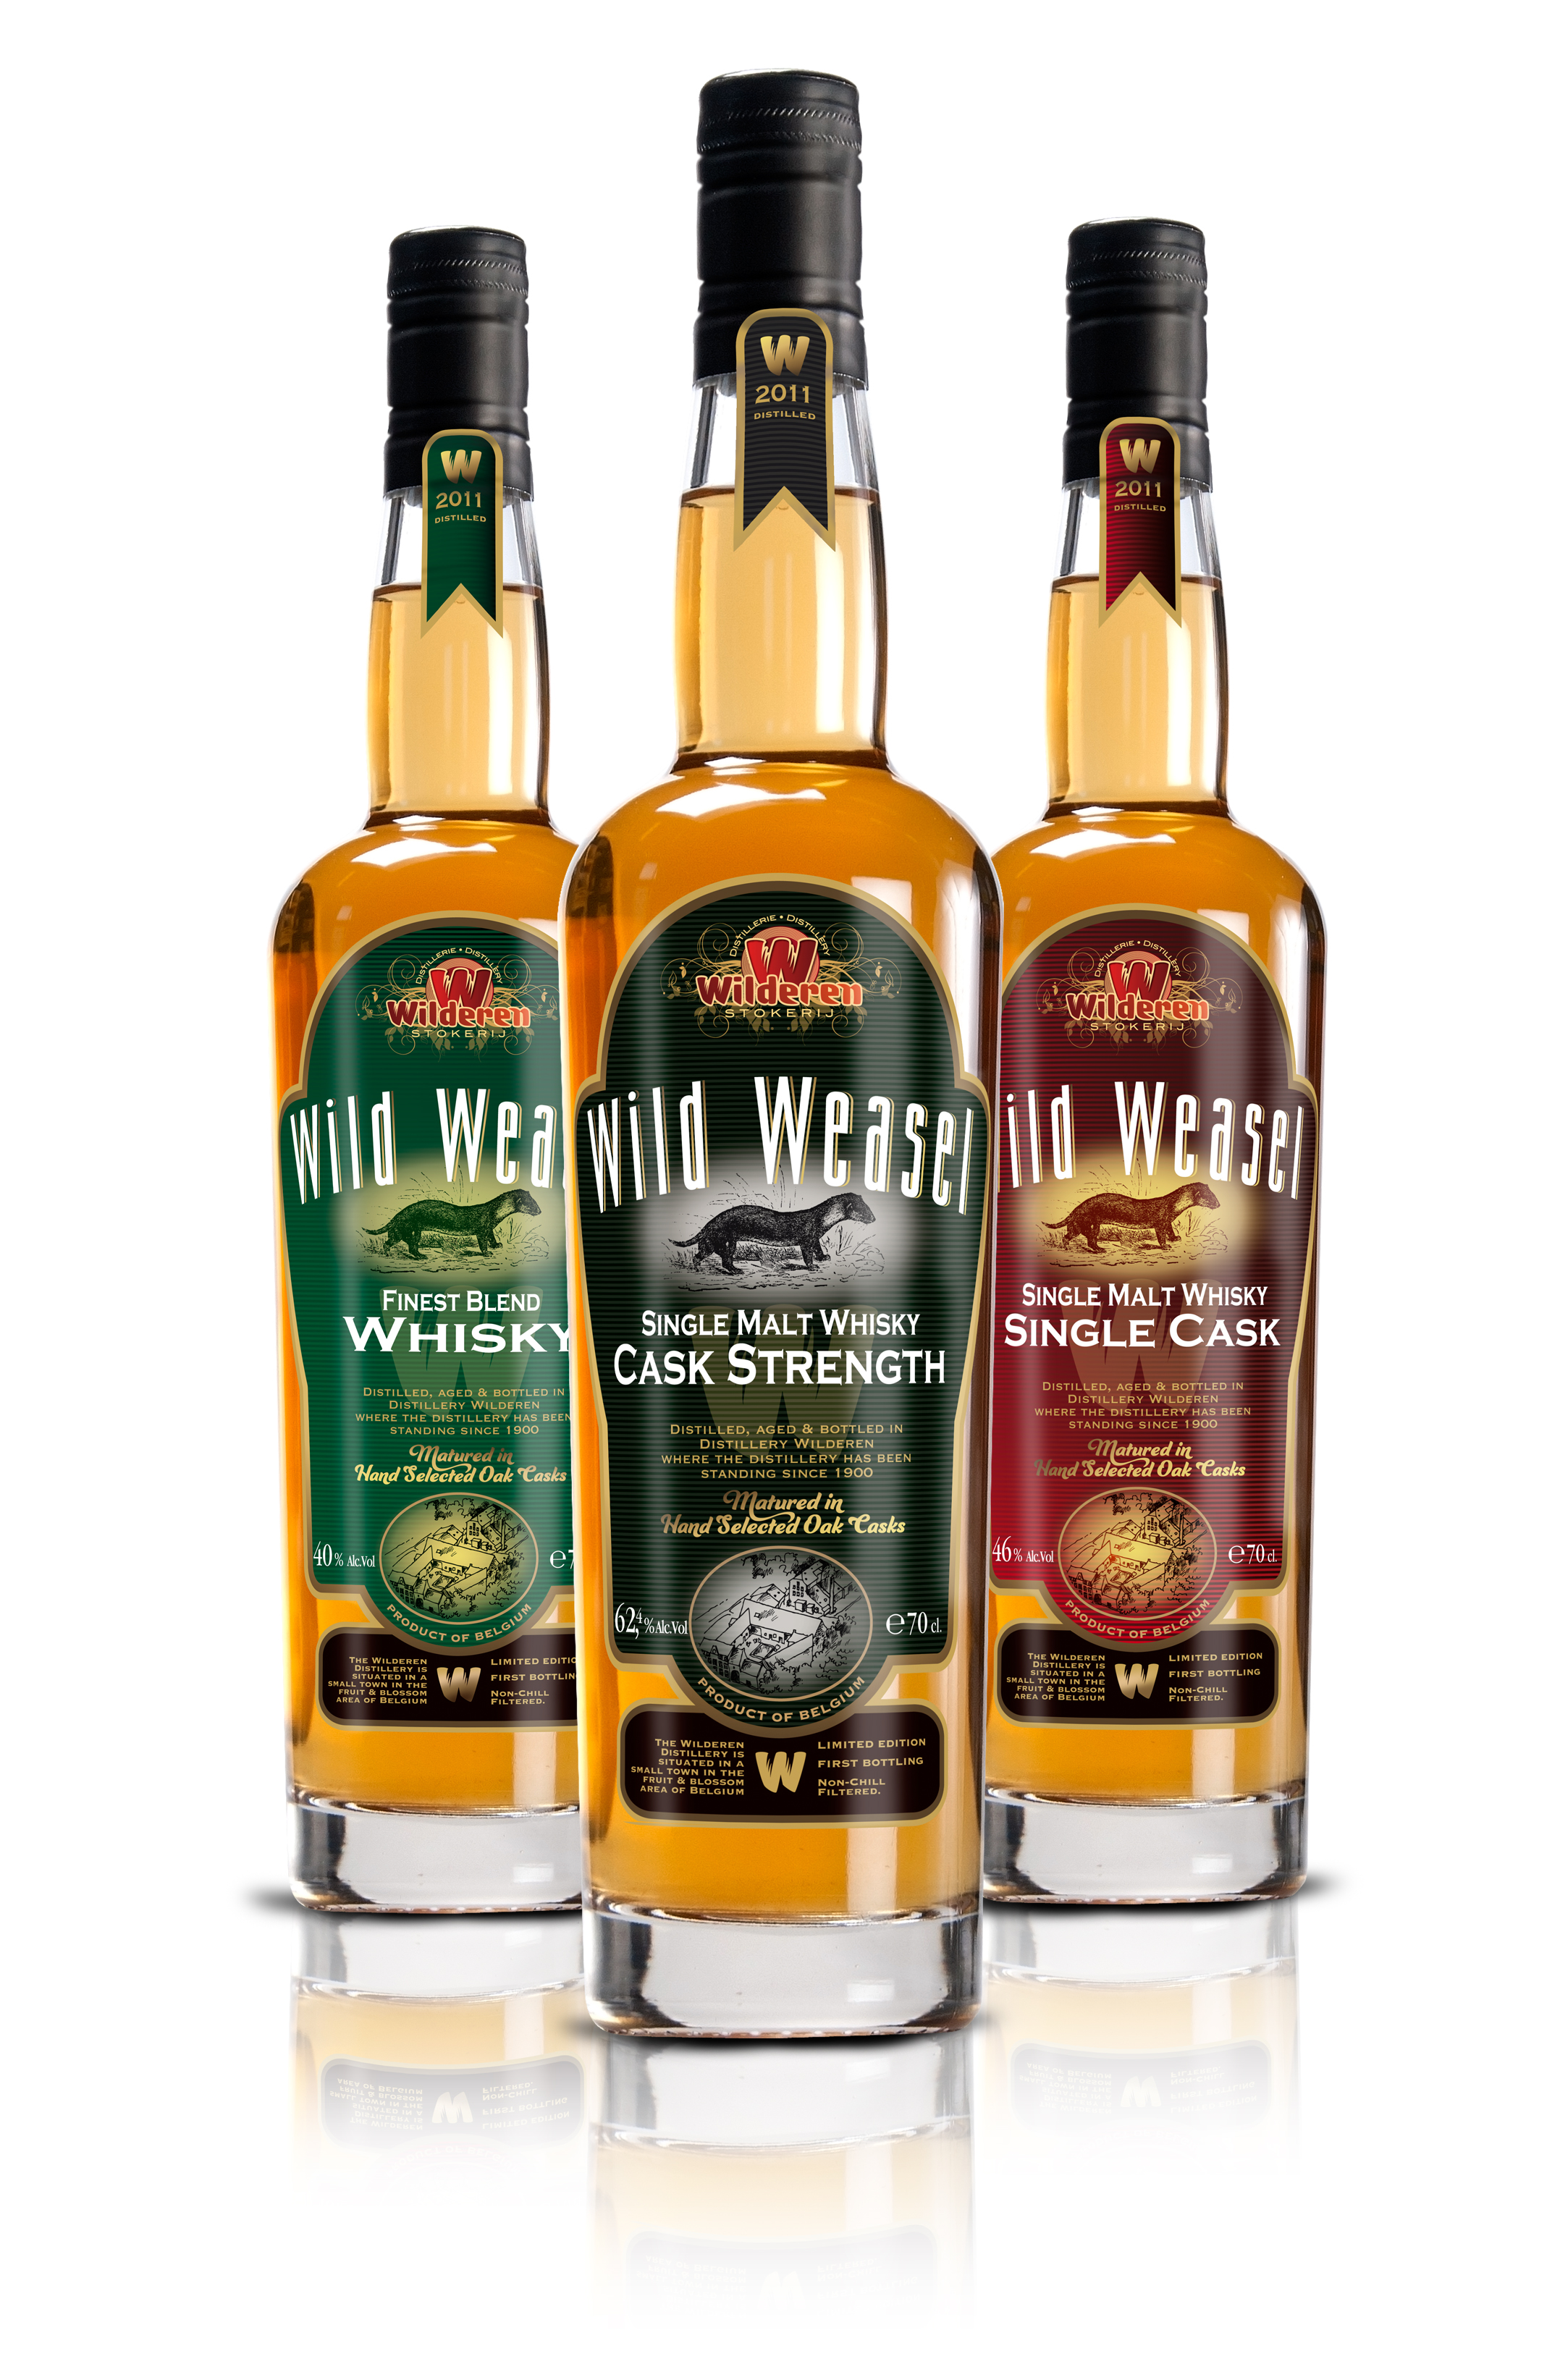 Wild Weasel Whisky